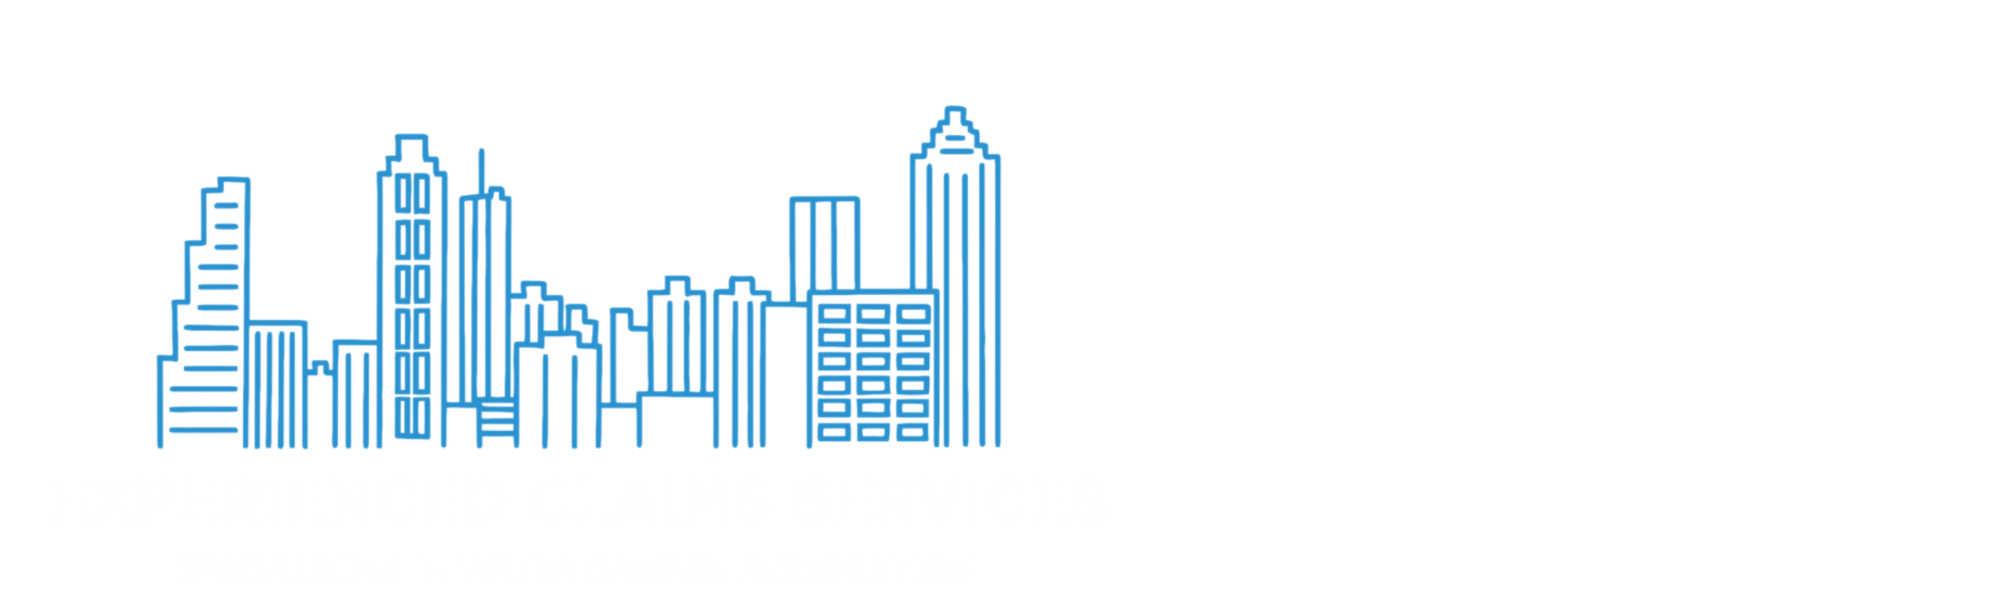 Experience Claims Services